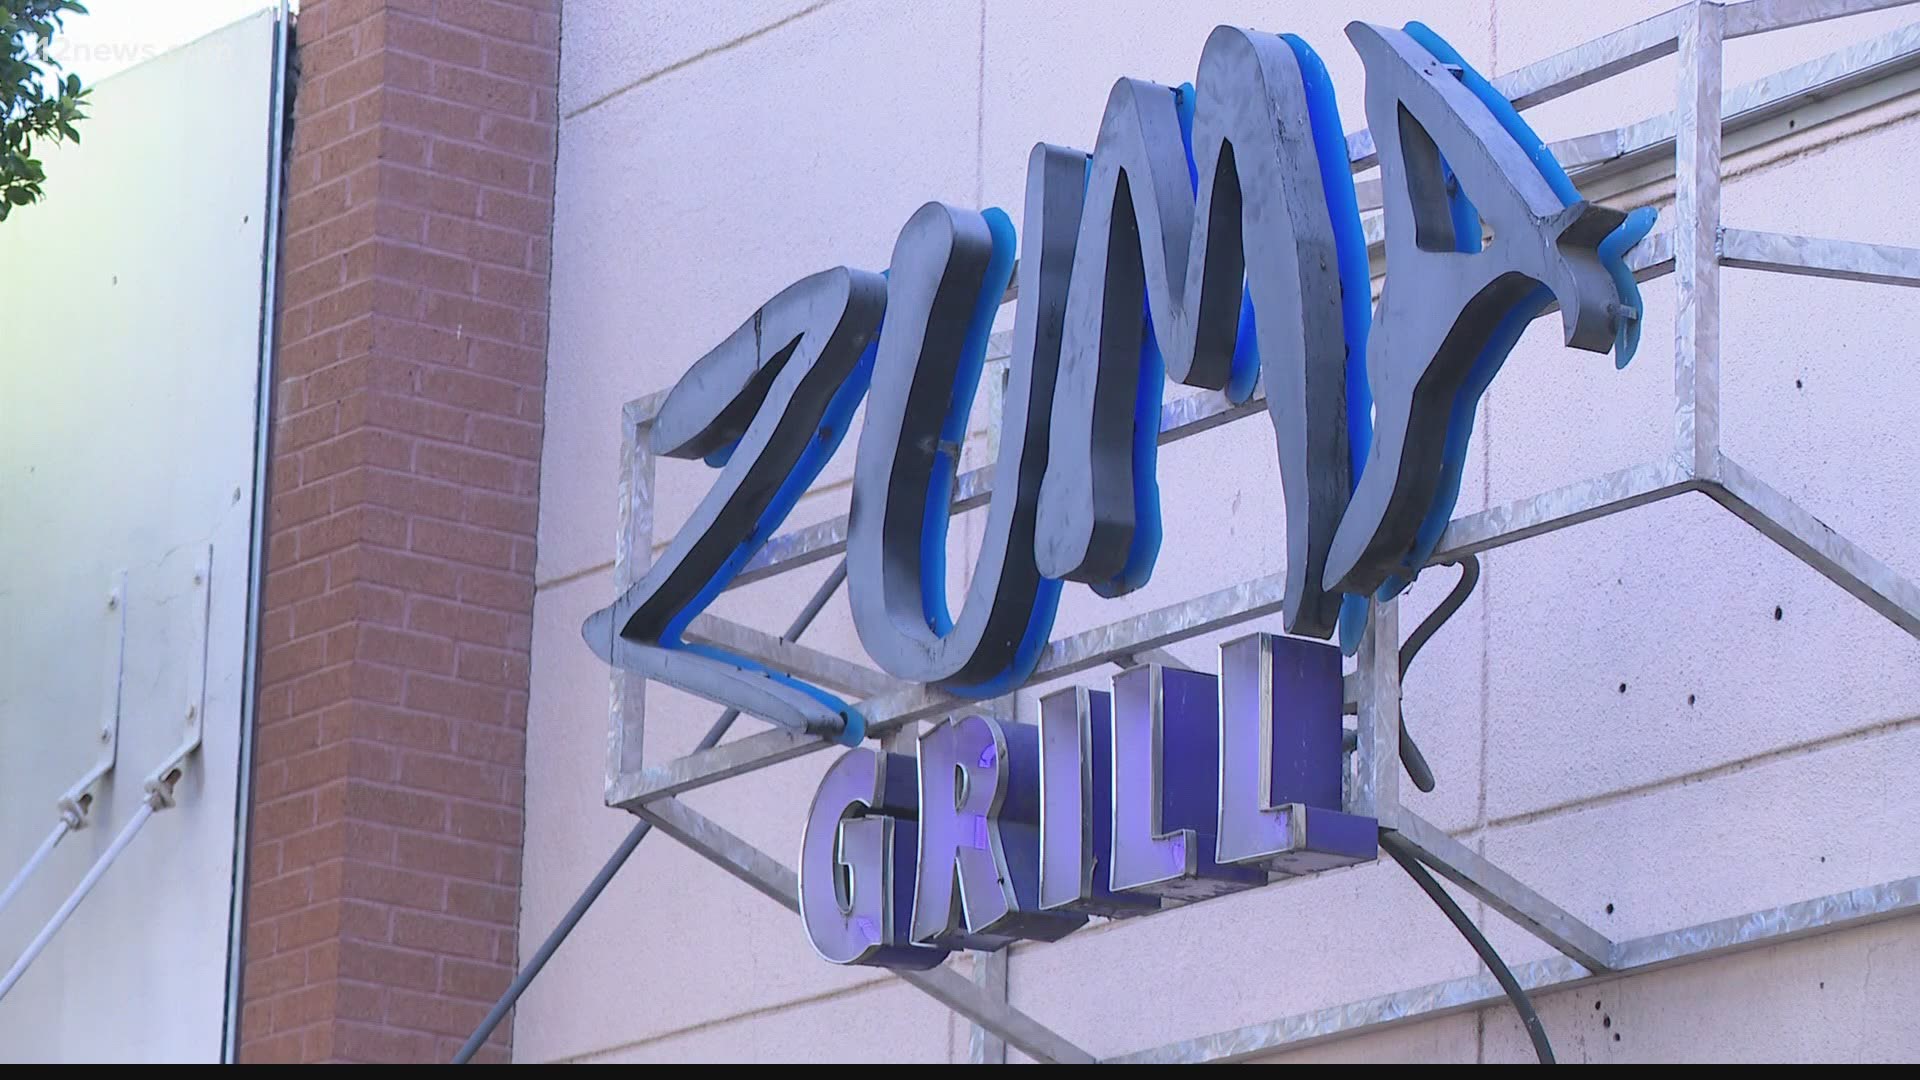 Three women received injuries after a shooting inside of a downtown Tempe restaurant early Saturday morning, officers from the Tempe Police Department said.